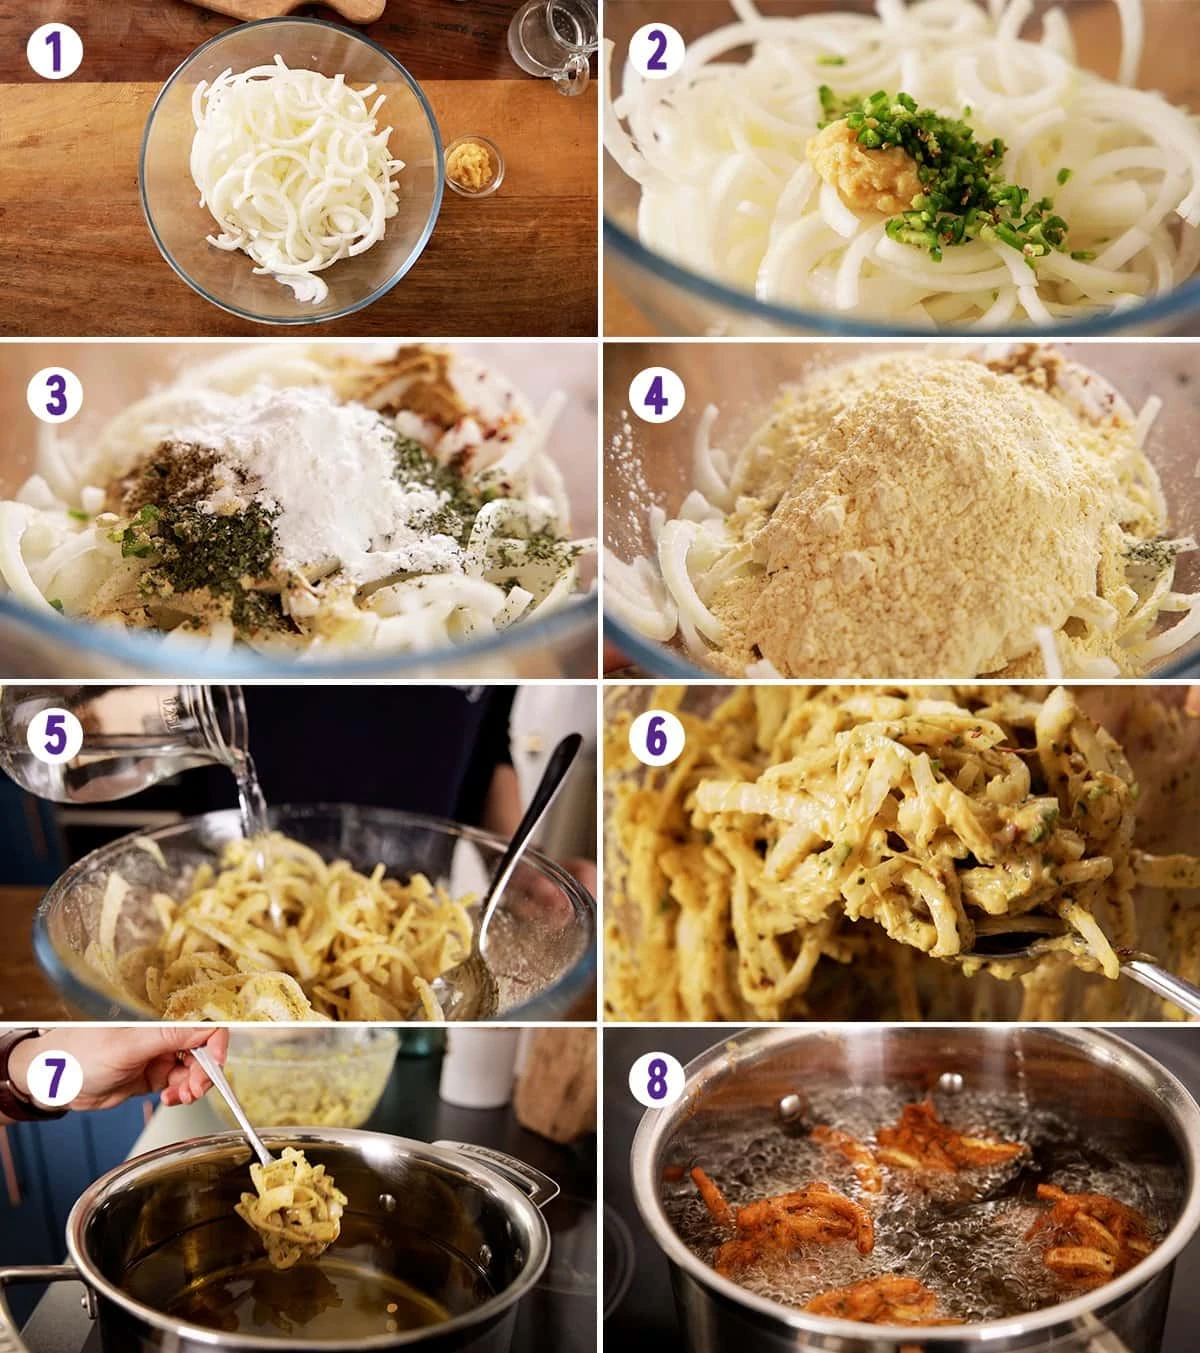 8 image collage showing how to make onion bhaji